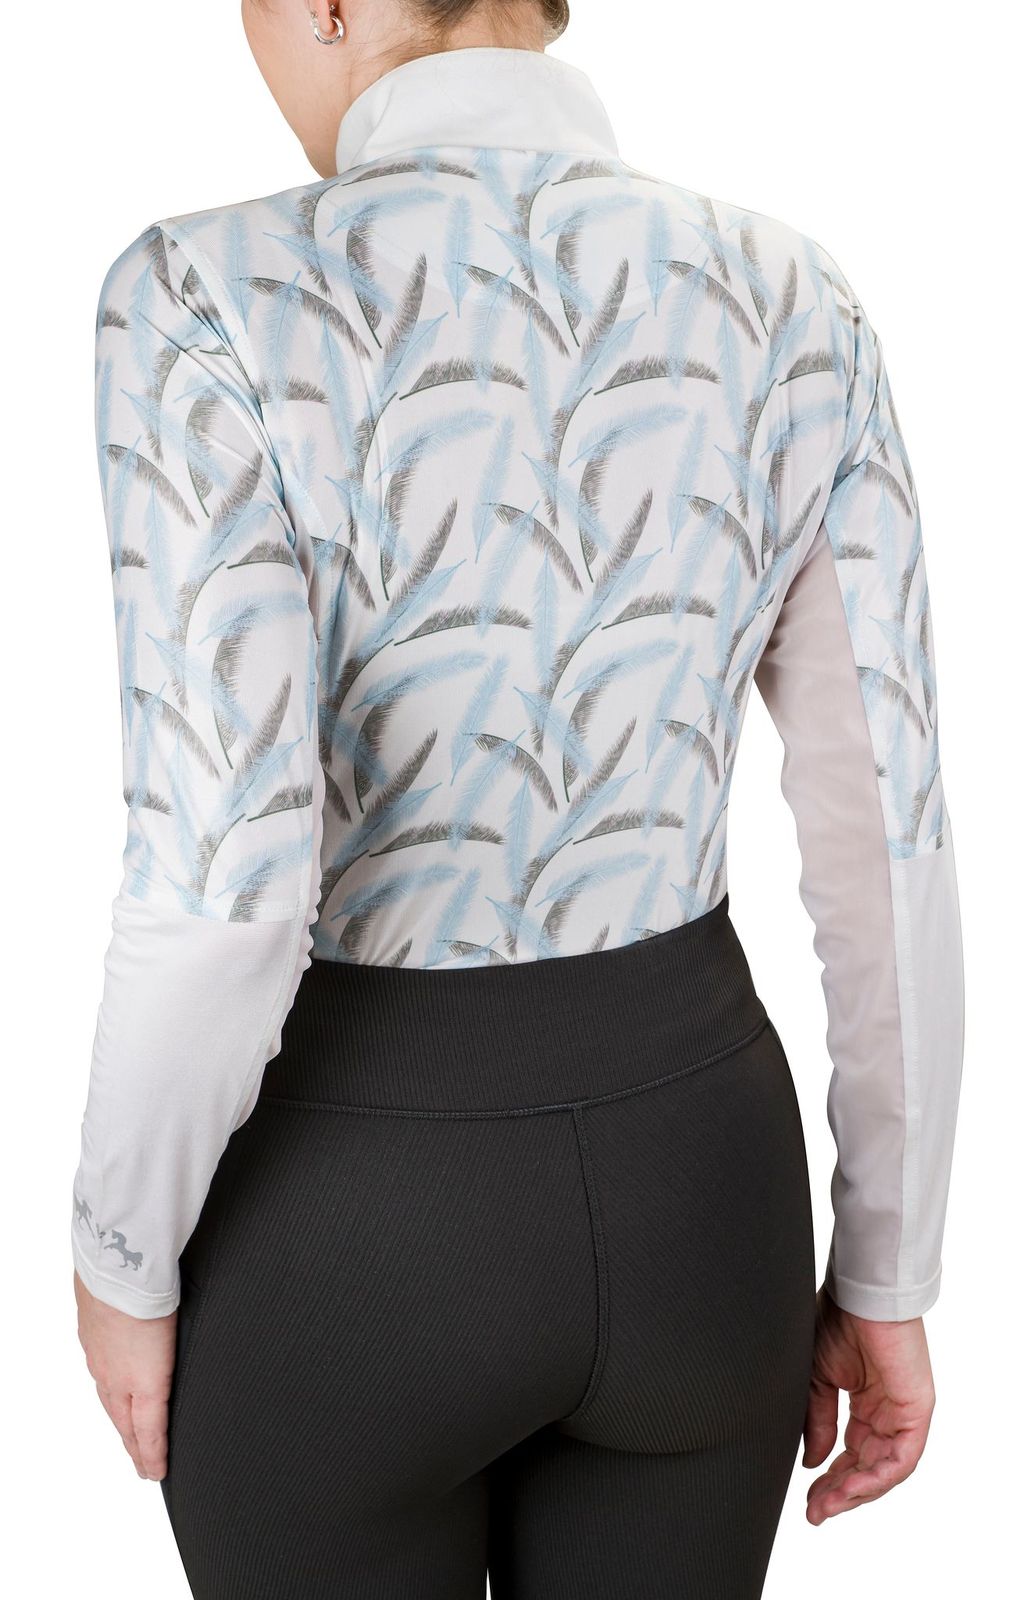 Equine Couture Equicool Feather Sport Shirt - Breeches.com